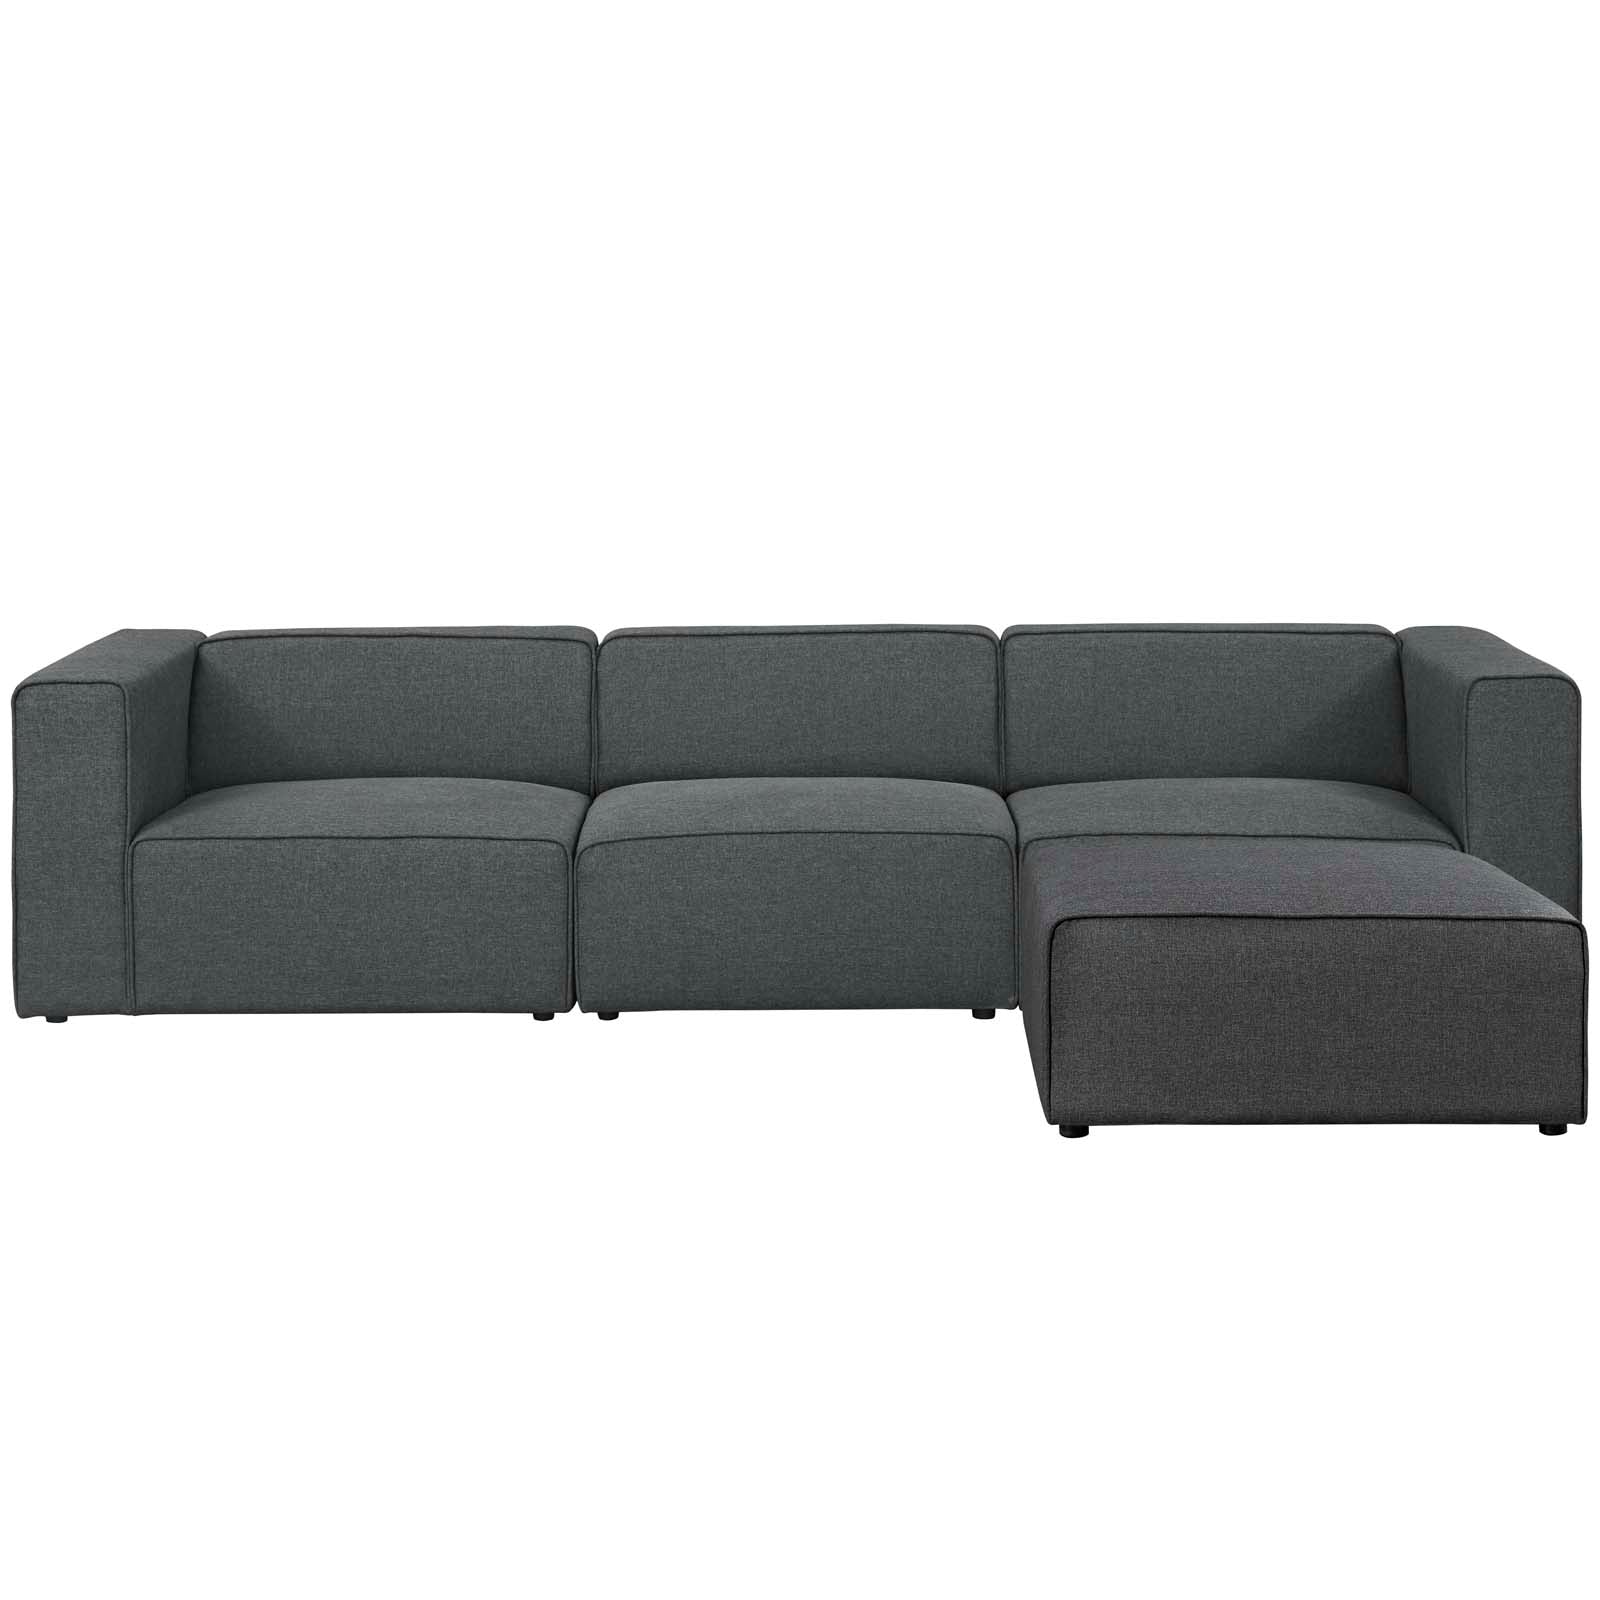 Modway Sectional Sofas - Mingle Upholstered Reversible Sectional Sofa Gray